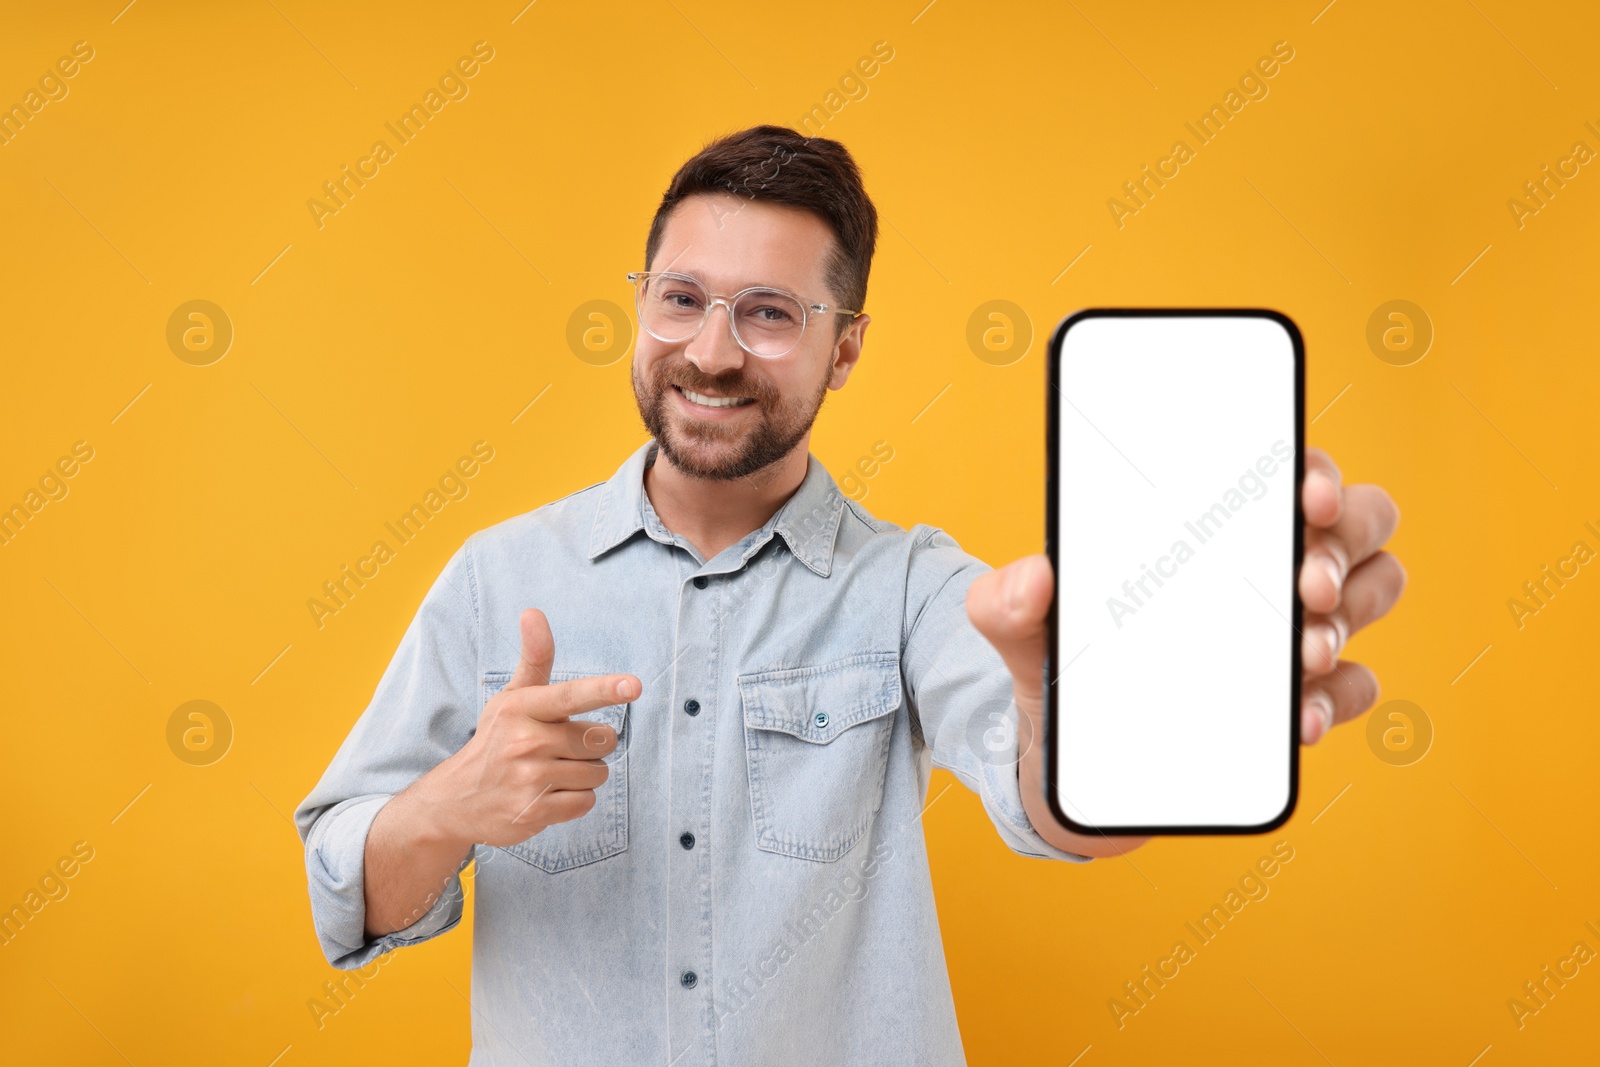 Photo of Handsome man showing smartphone in hand and pointing at it on yellow background